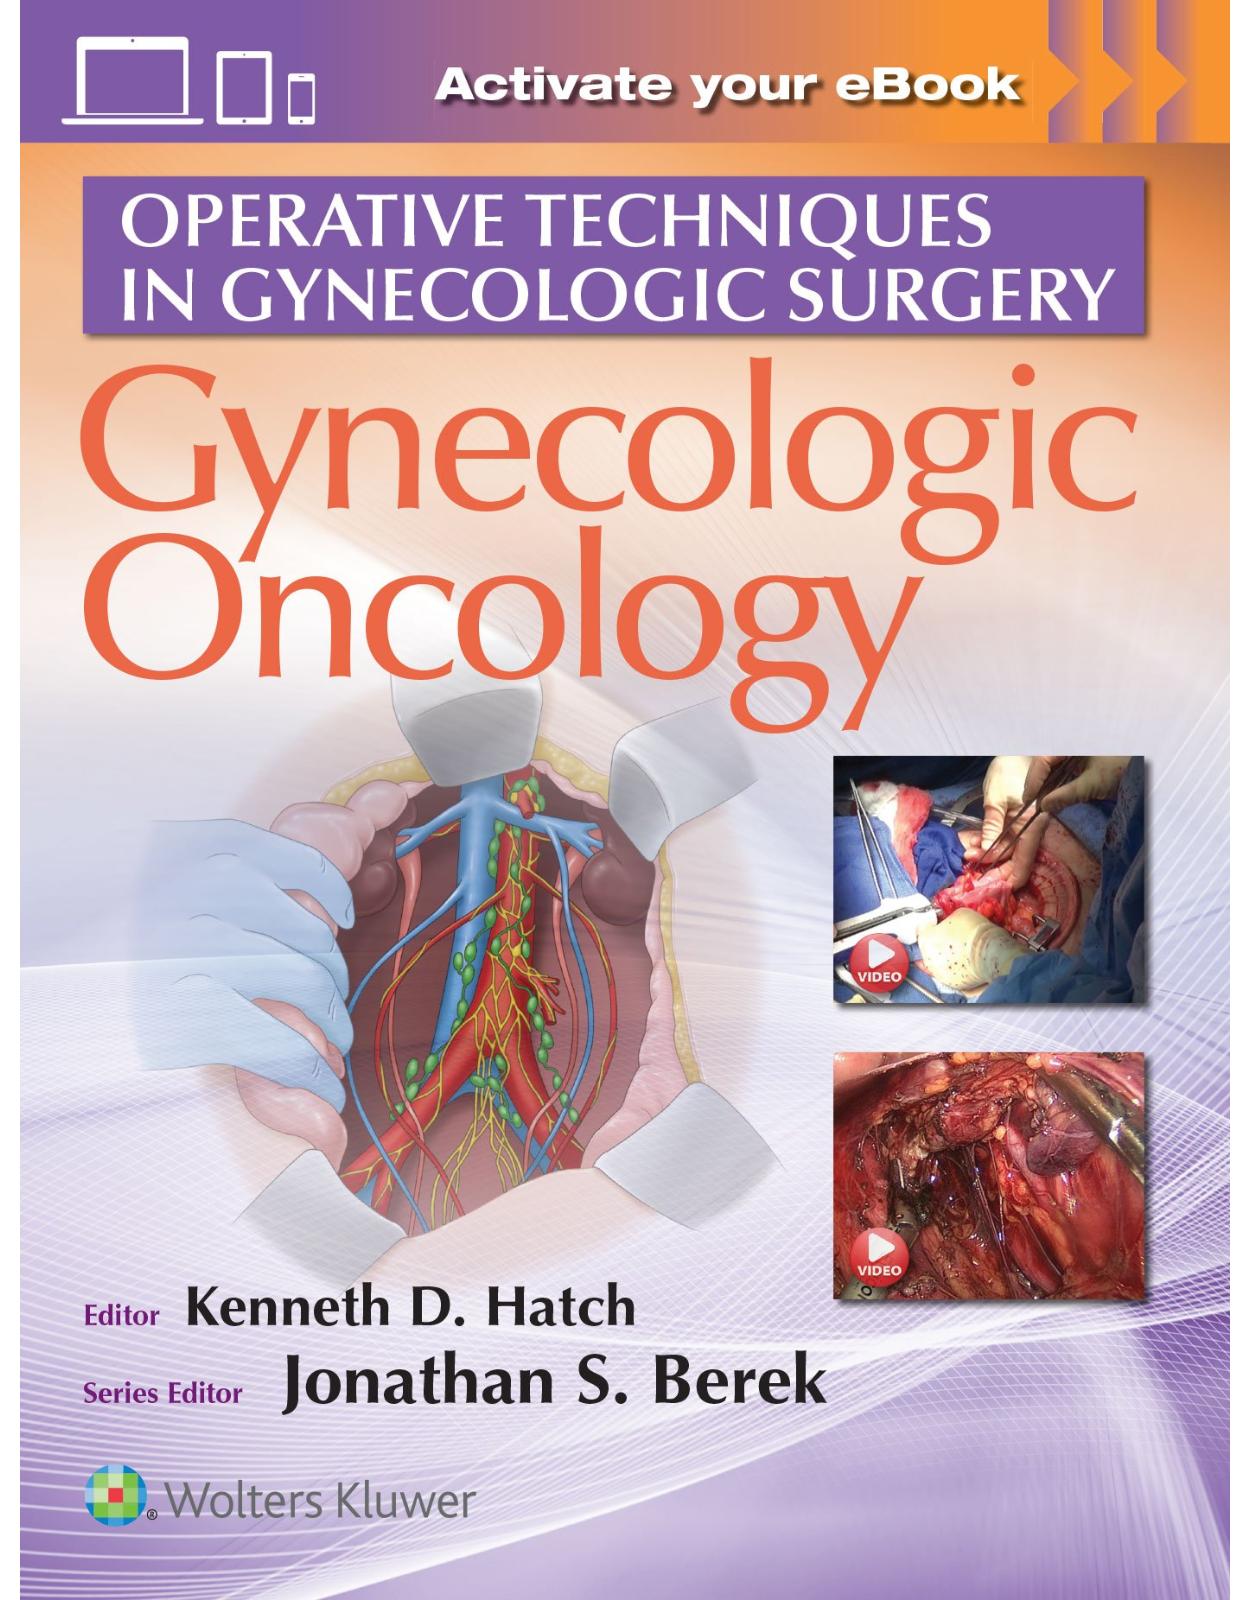 Operative Techniques in Gynecologic Surgery: Gynecologic Oncology